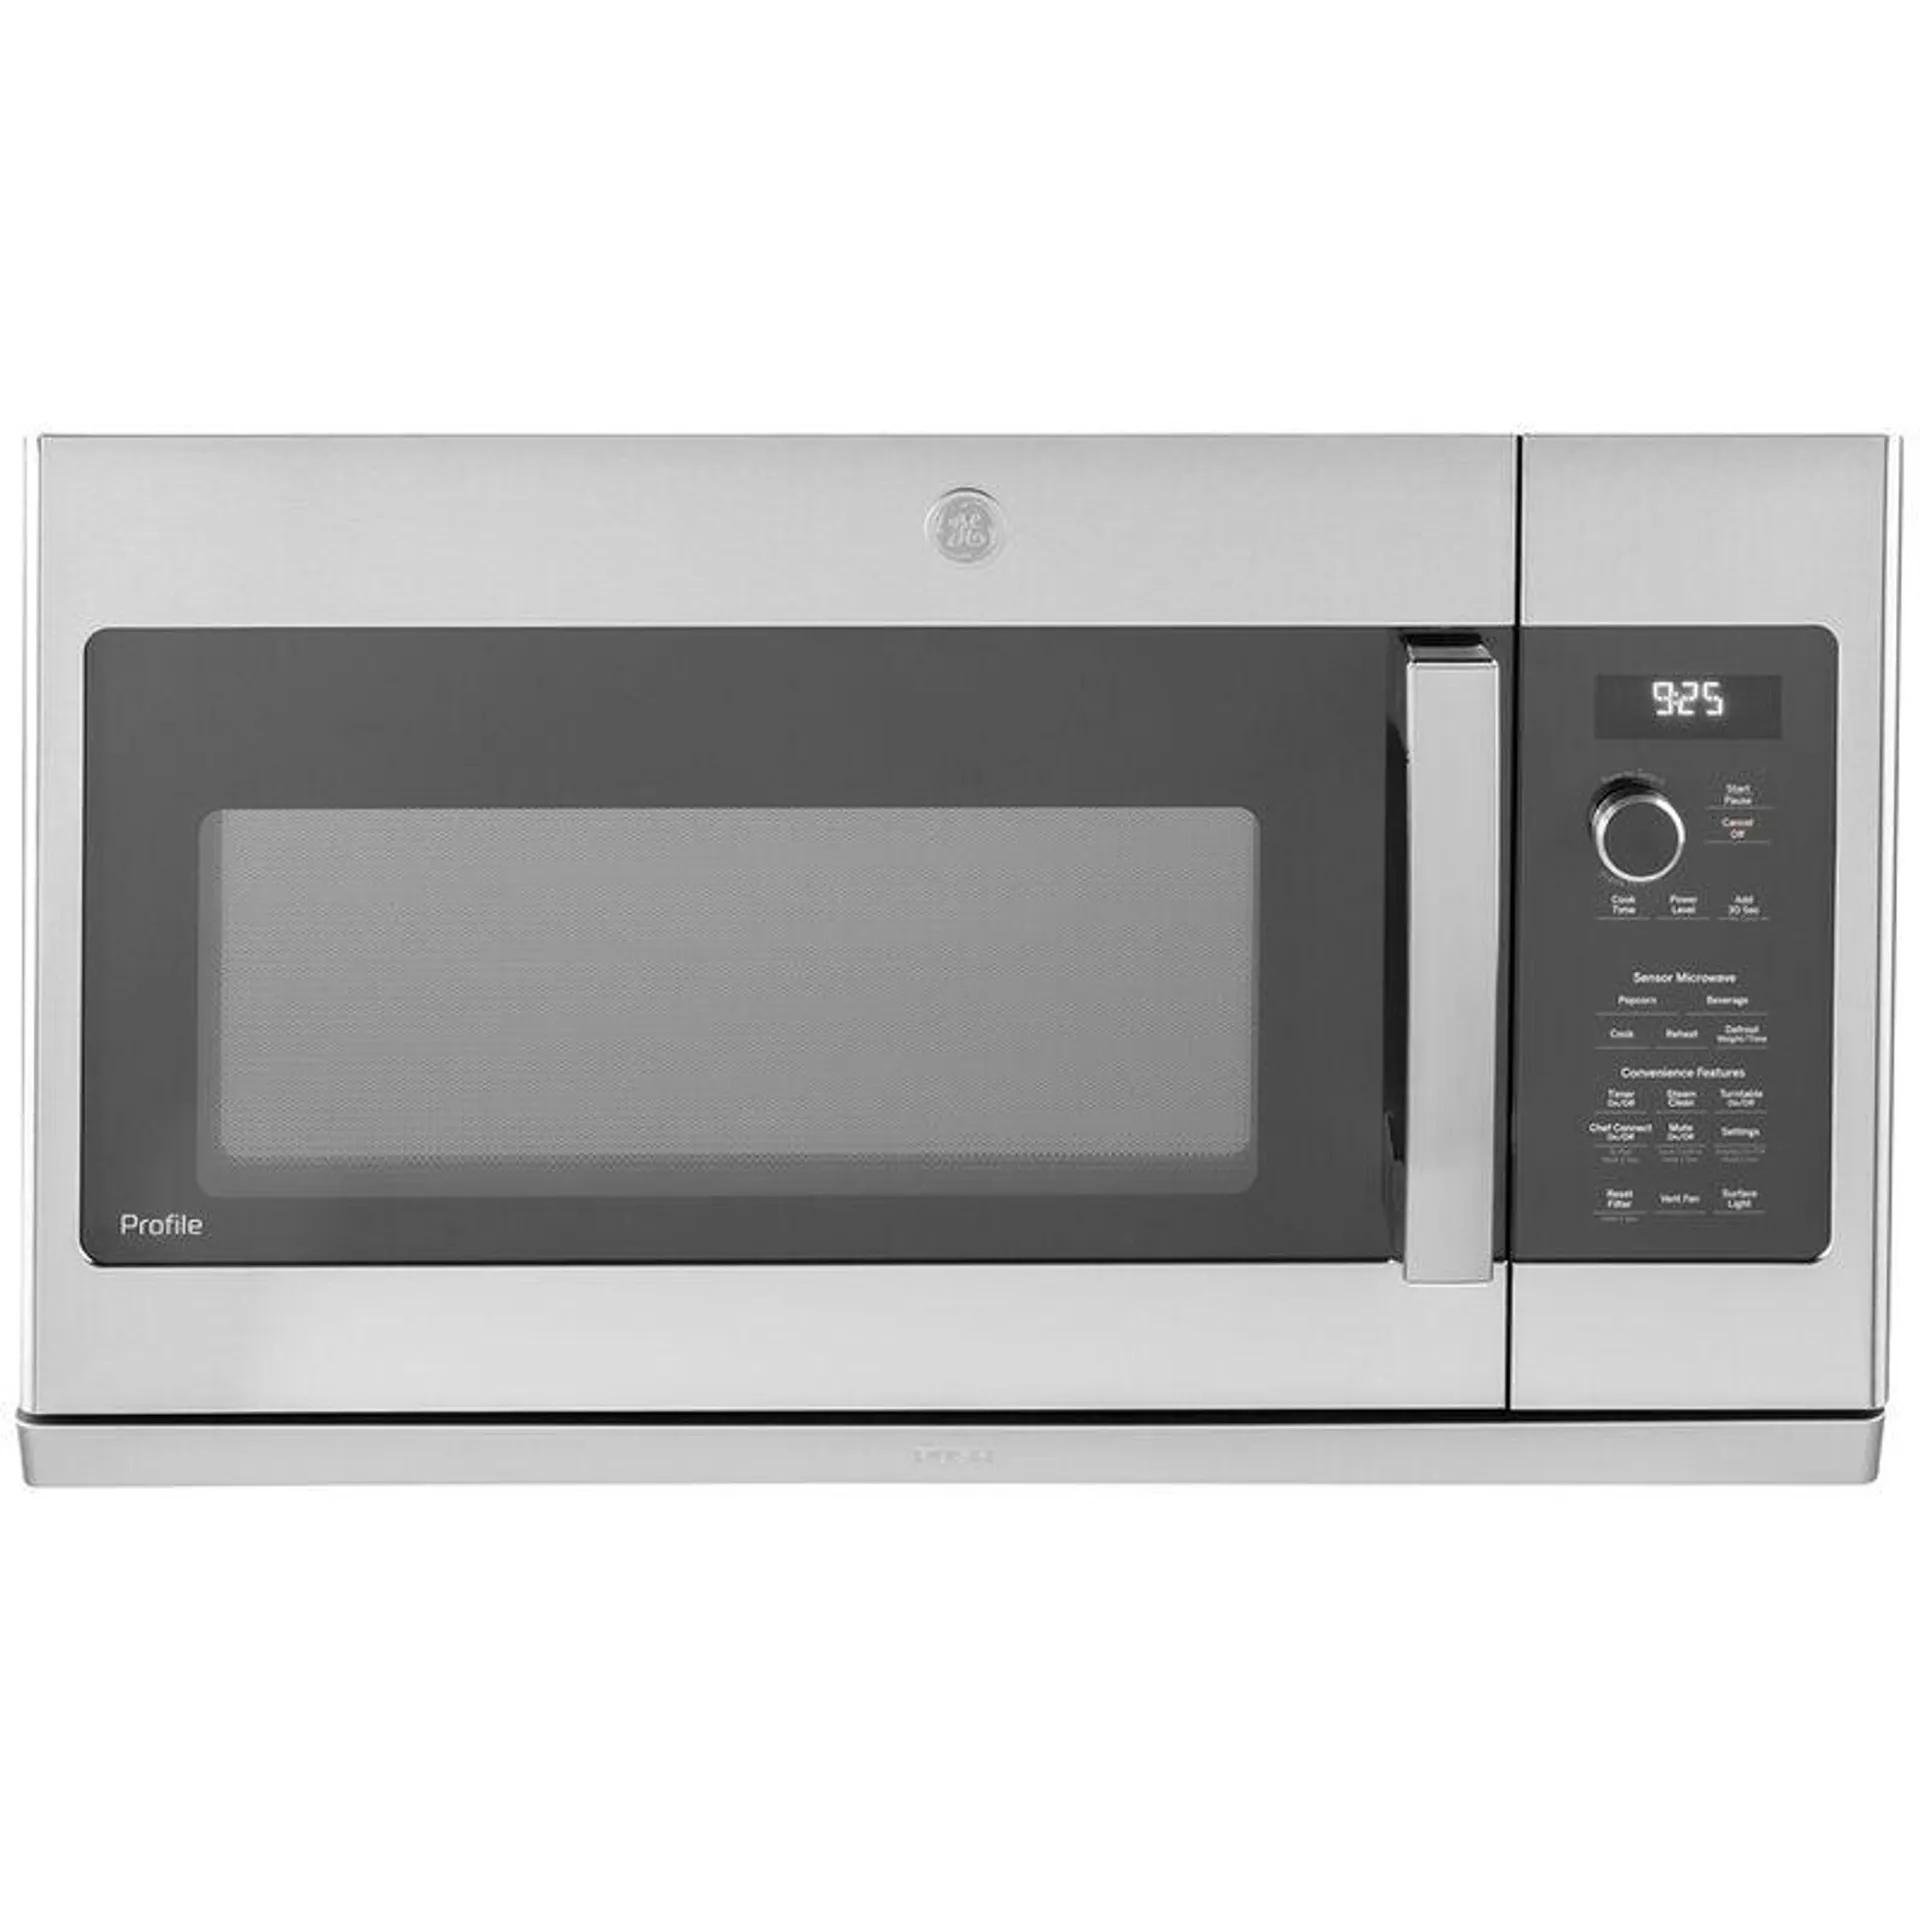 GE Profile 30" 2.2 Cu. Ft. Over-the-Range Microwave with 10 Power Levels, 400 CFM & Sensor Cooking Controls - Stainless Steel